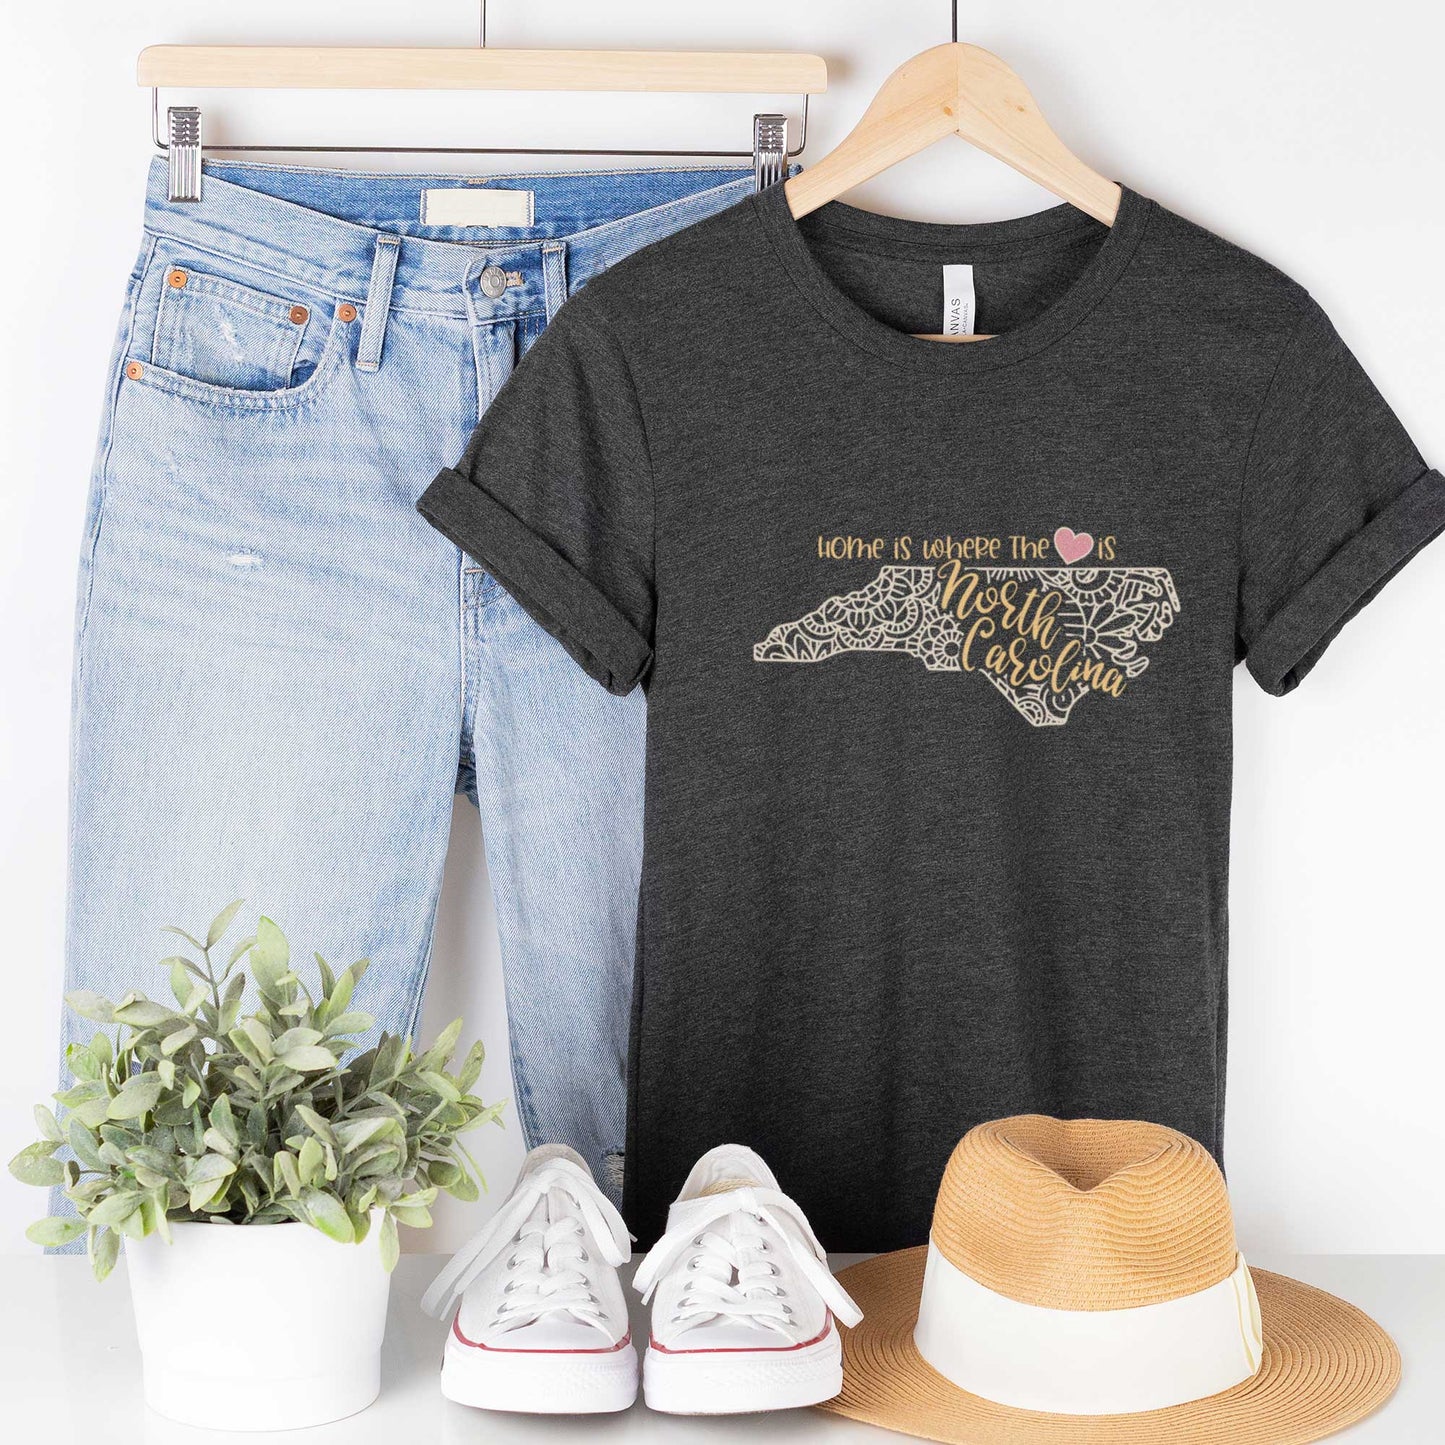 North Carolina: Home is Where the Heart Is - Adult Unisex Jersey Crew Tee